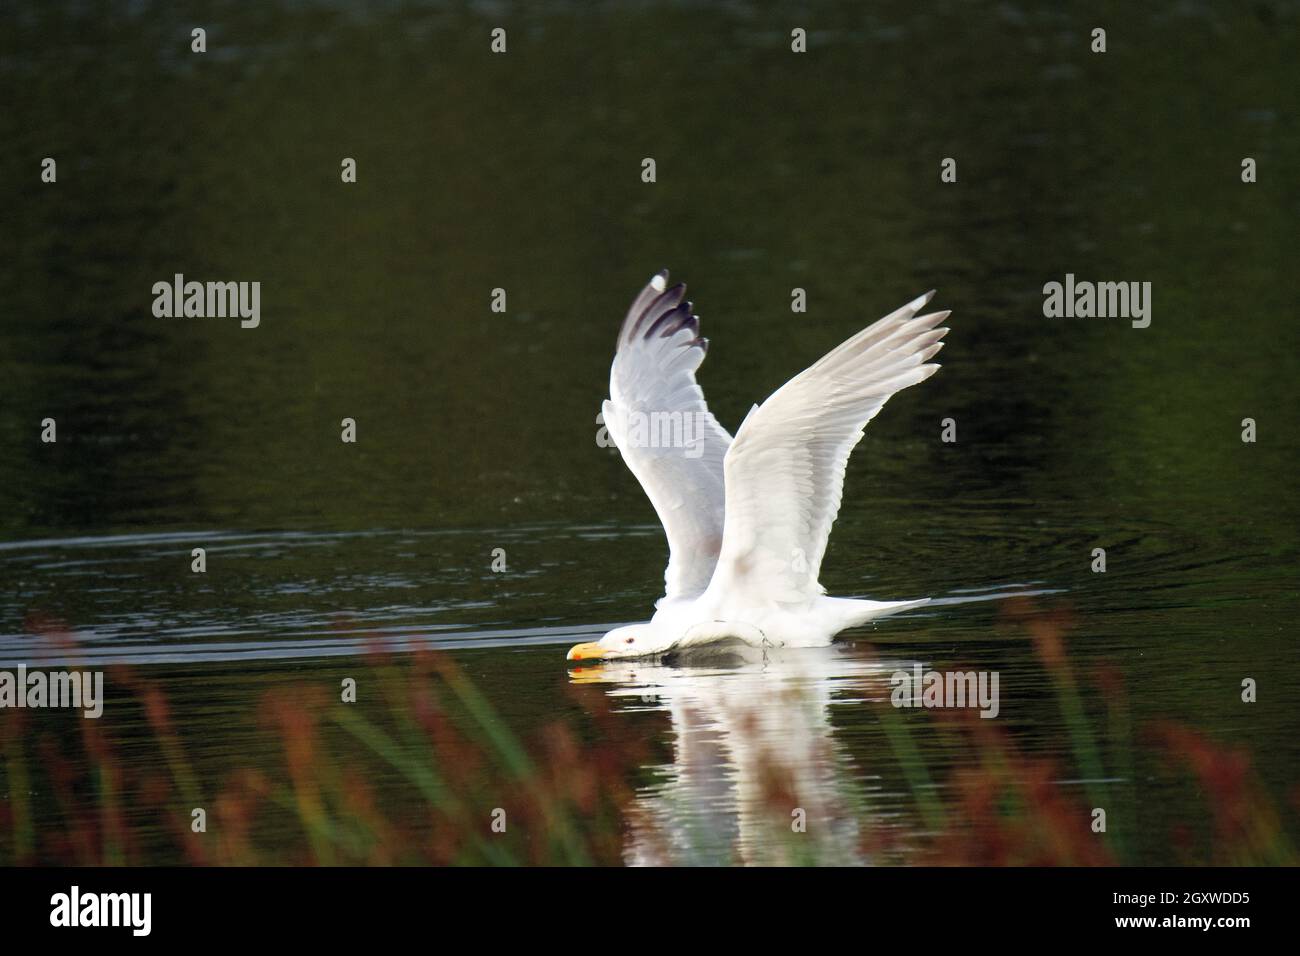 Glaucous winged gull, Larus glaucescens, taking off over water, Potter Marsh, Anchorage, Alaska, USA Stock Photo